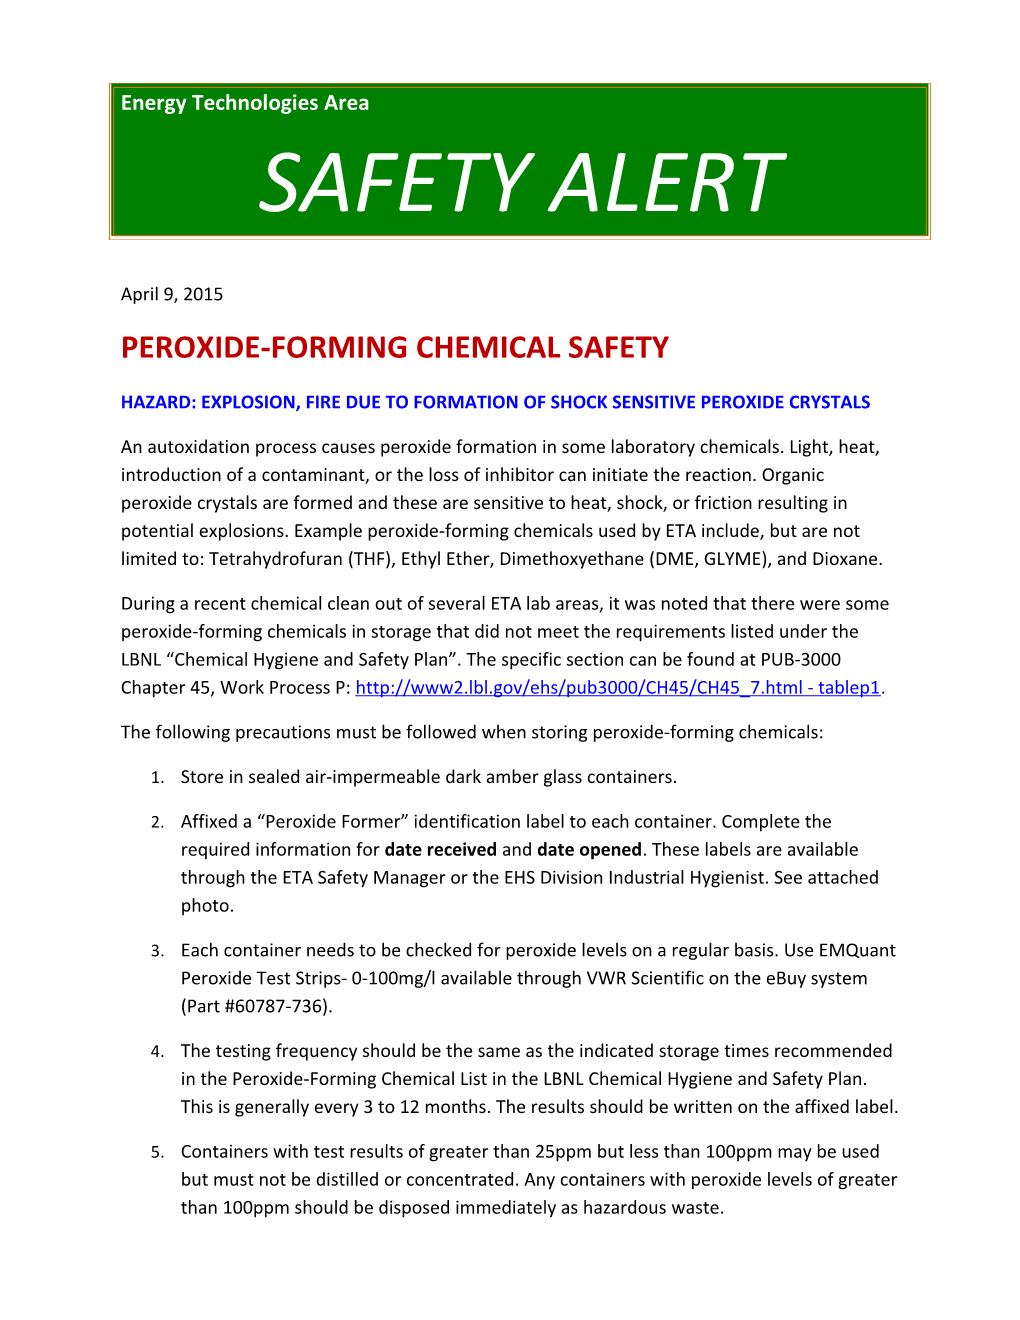 Peroxide-Forming Chemical Safety